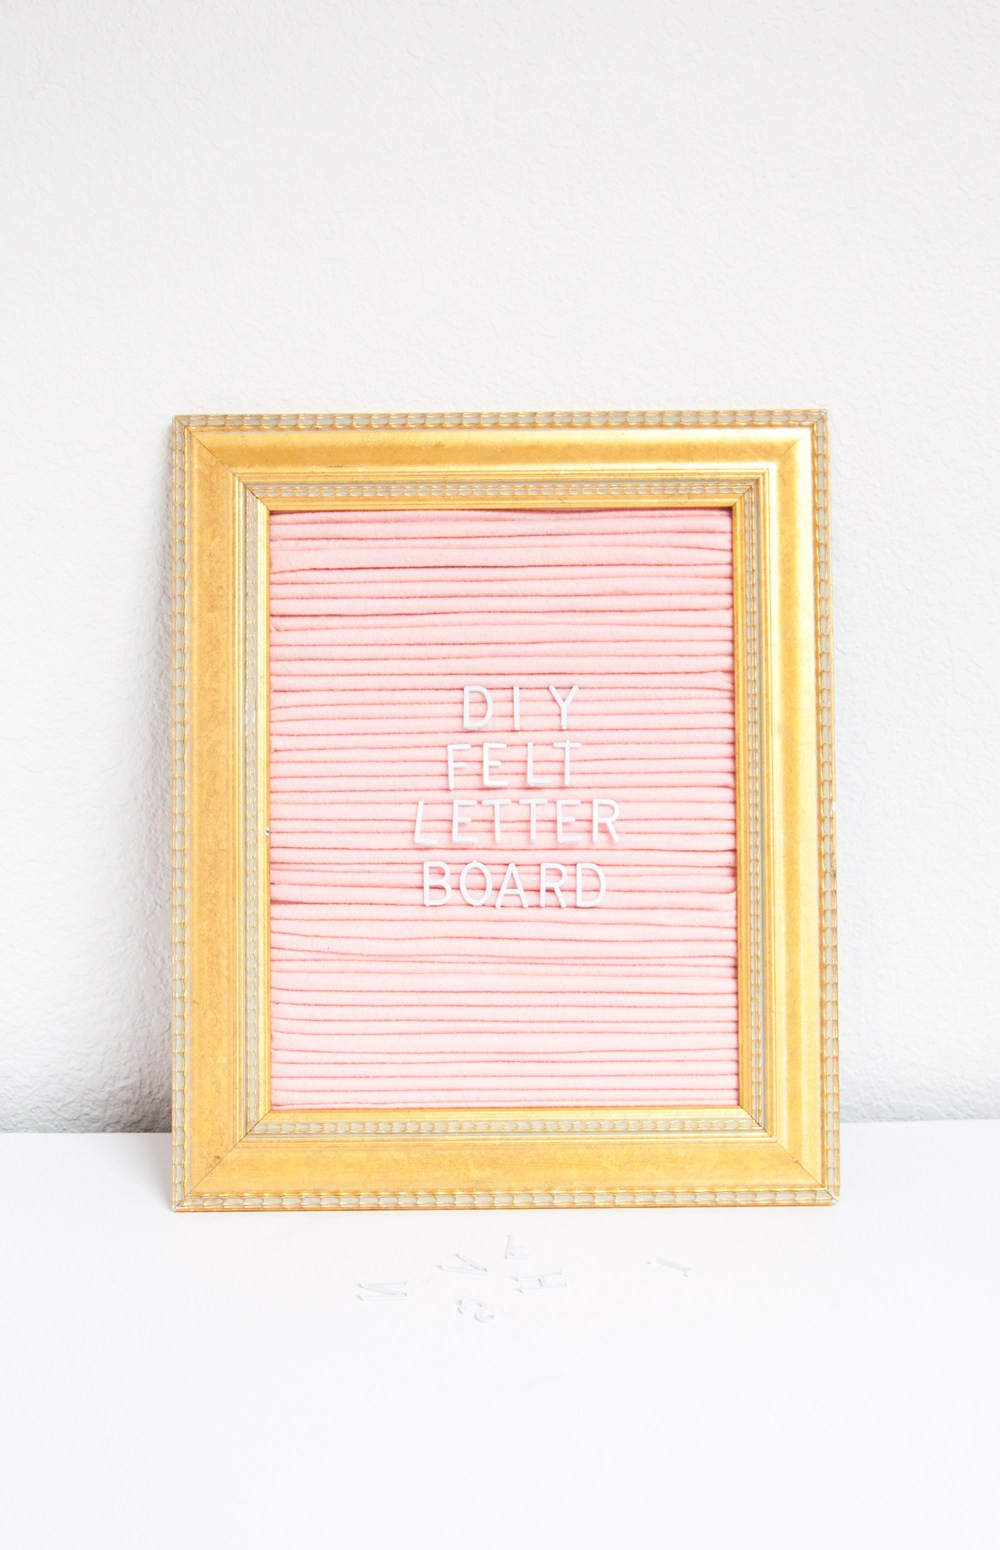 Best ideas about DIY Letter Board
. Save or Pin 10 WAYS TO DIY A LETTER BOARD Mad in Crafts Now.